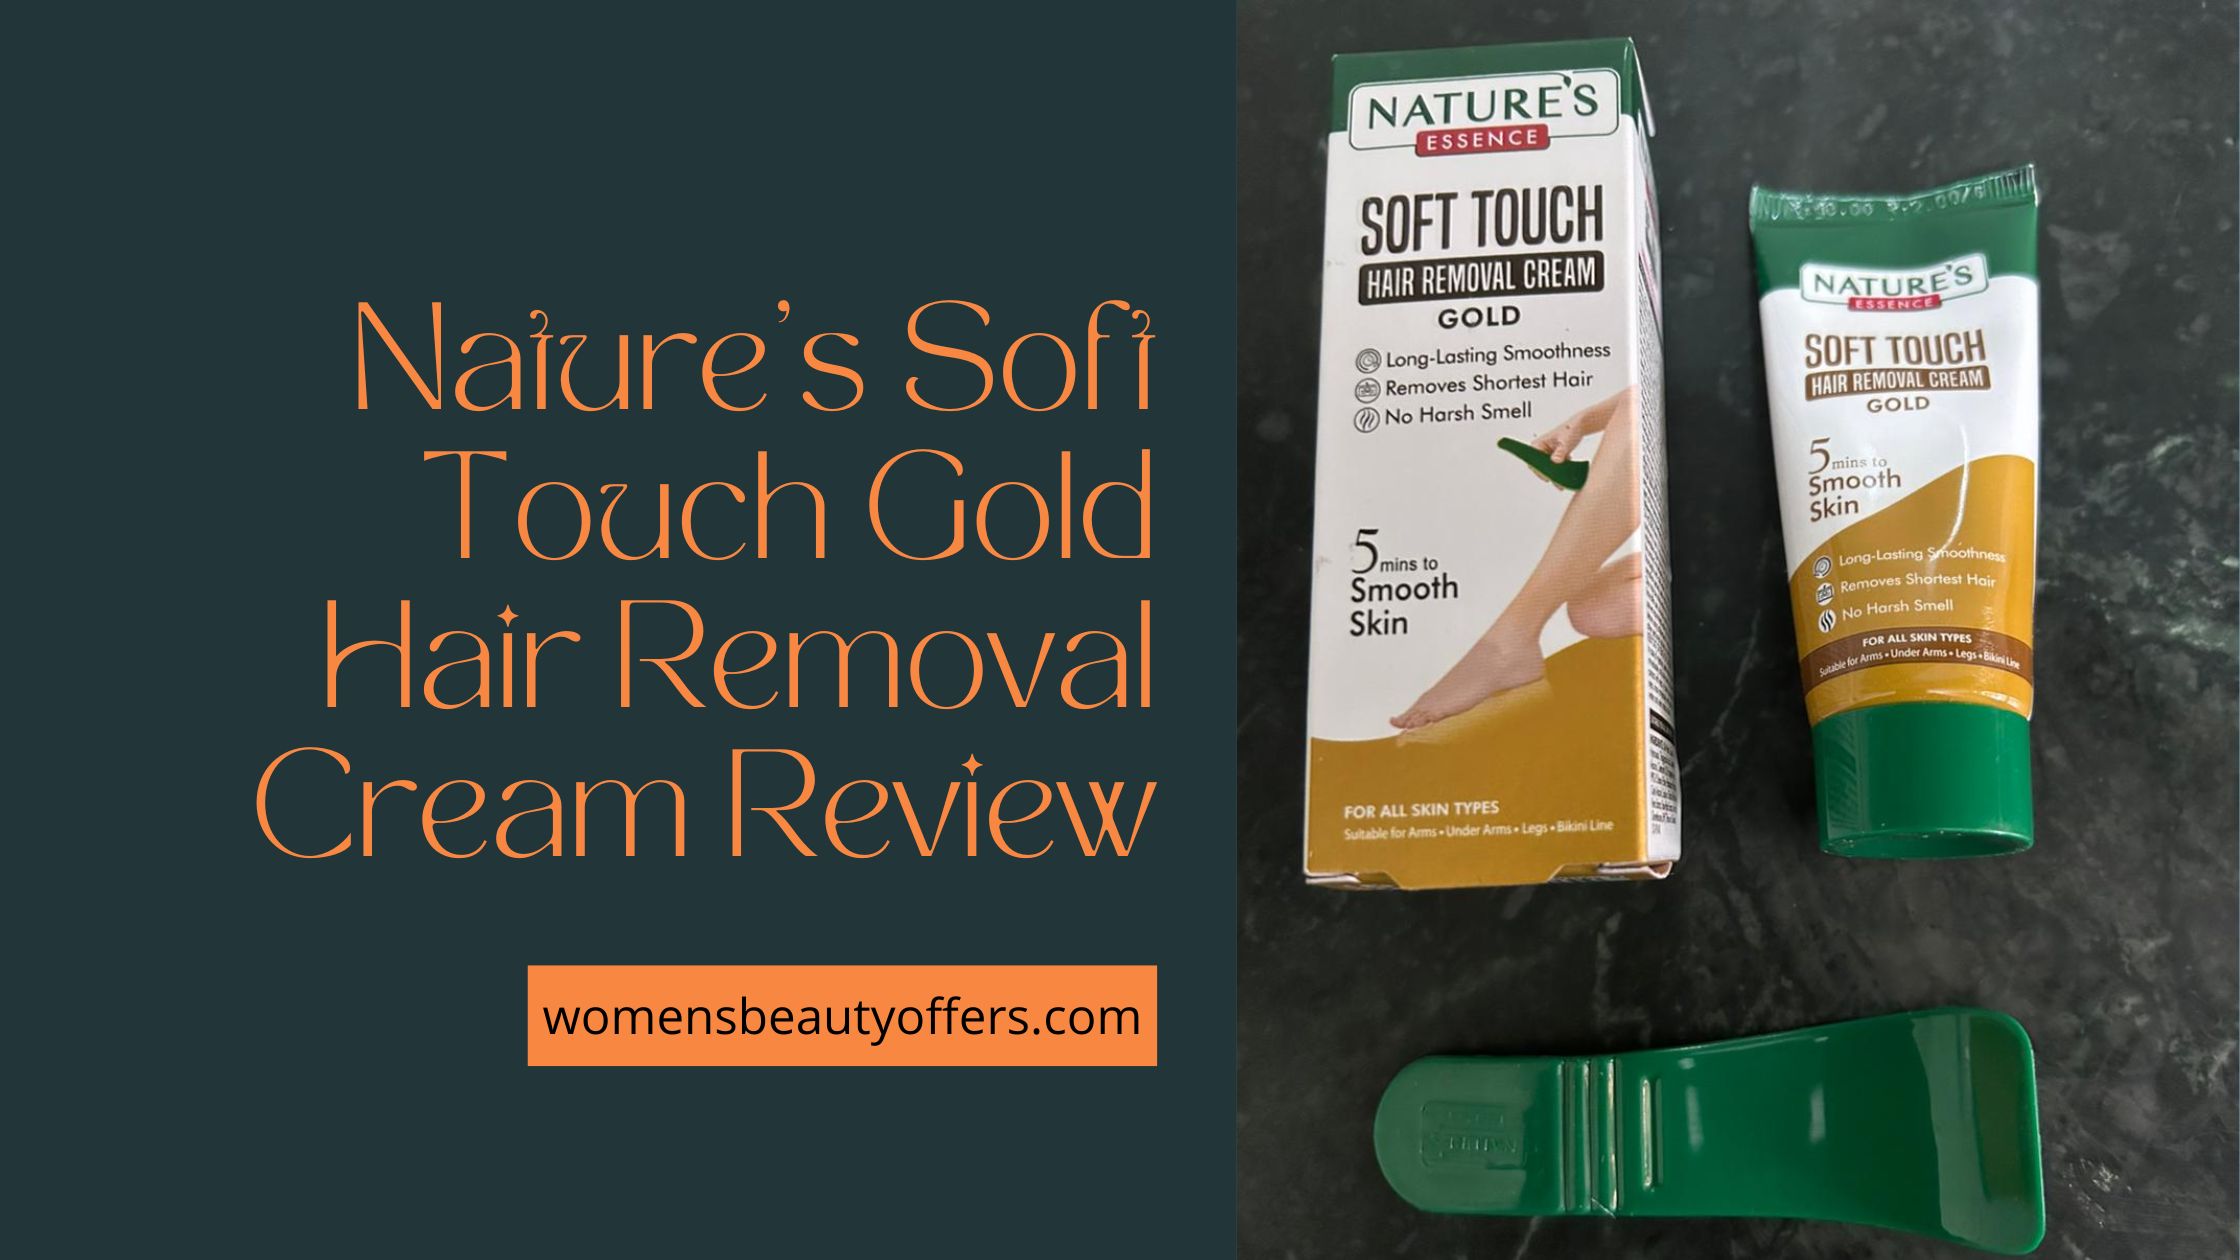 Nature’s Soft Touch Gold Hair Removal Cream Review